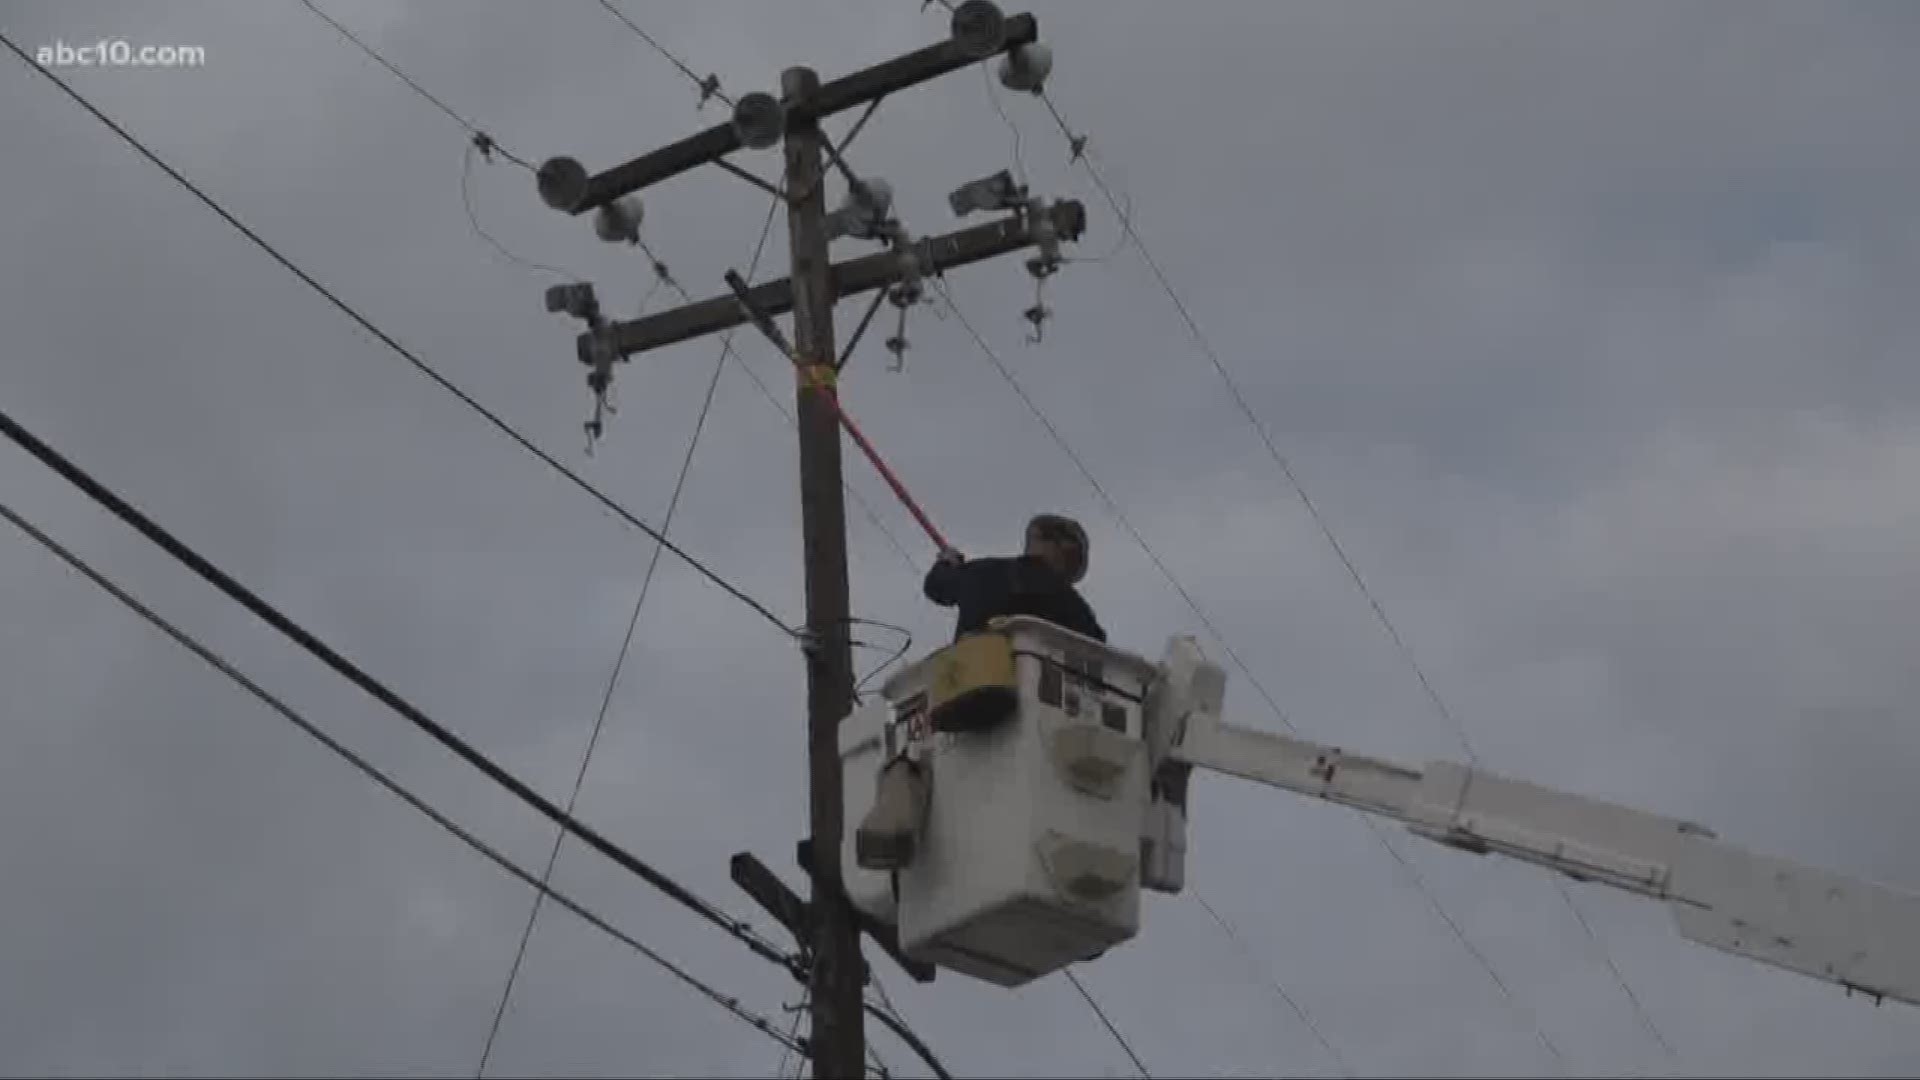 Sunday night’s storm left thousands in the dark. One of the hardest hit areas was Arden Arcade, with more than 20,000 homes without power. ABC10 spoke with some residents who said they were not prepared for the storm’s intensity.